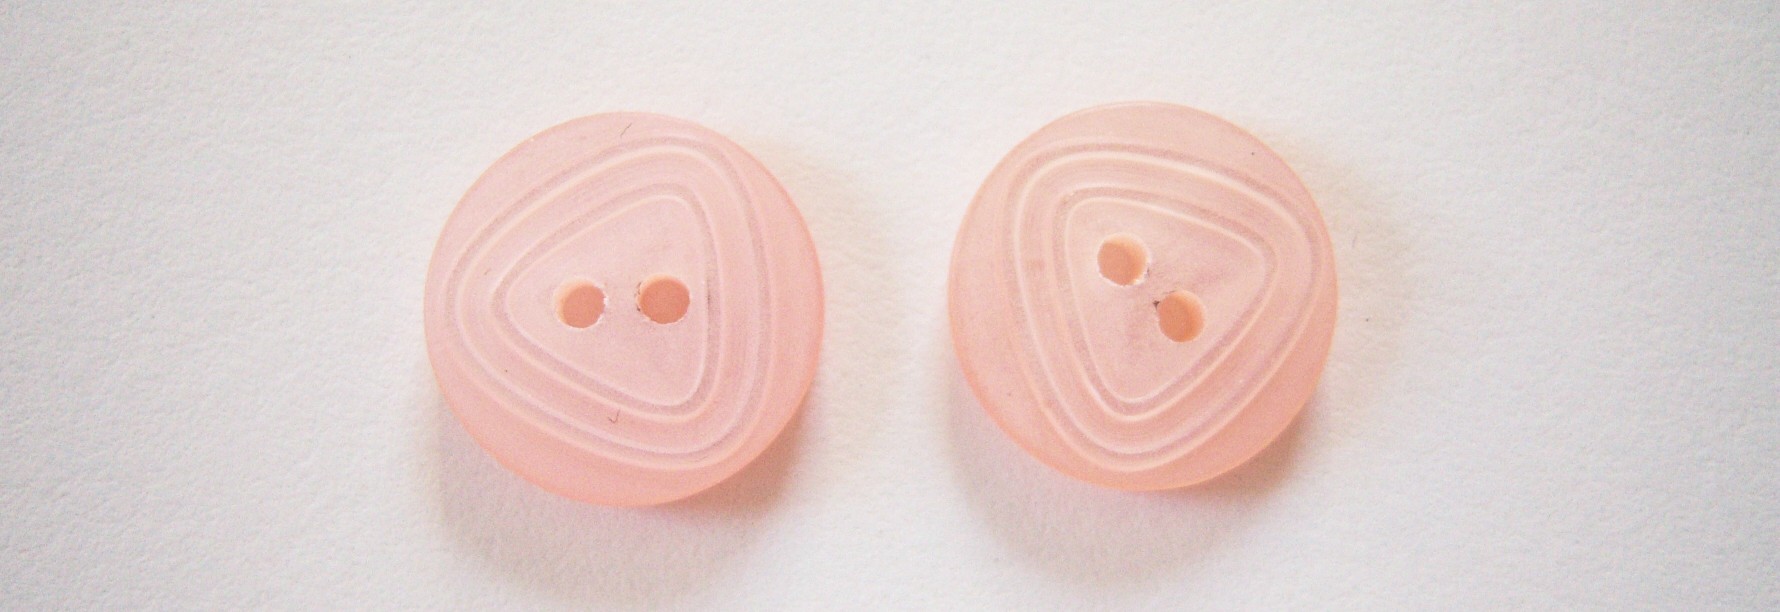 Peach Pearlized 5/8" 2 Buttons